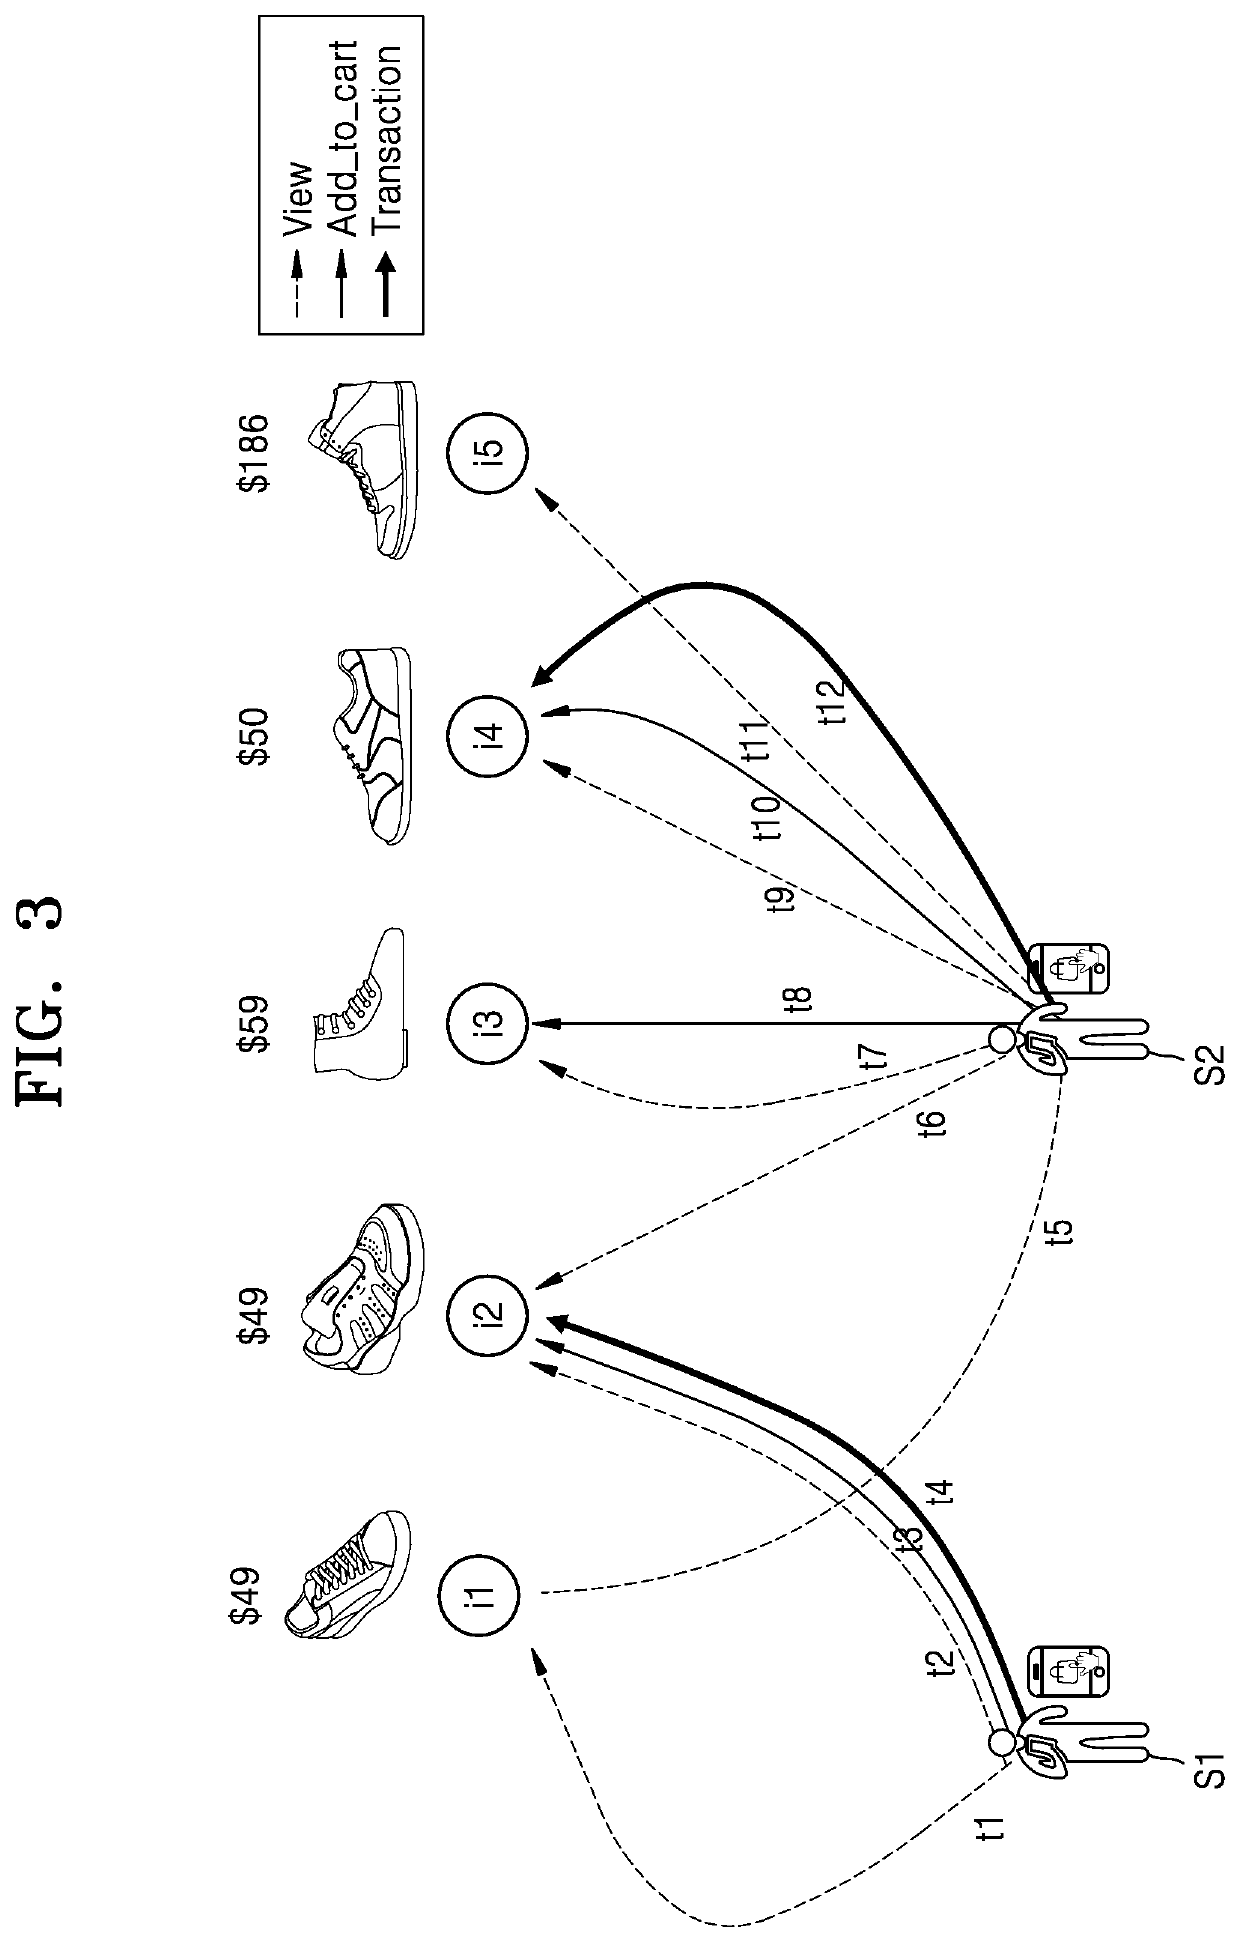 Method and device for predicting next event to occur